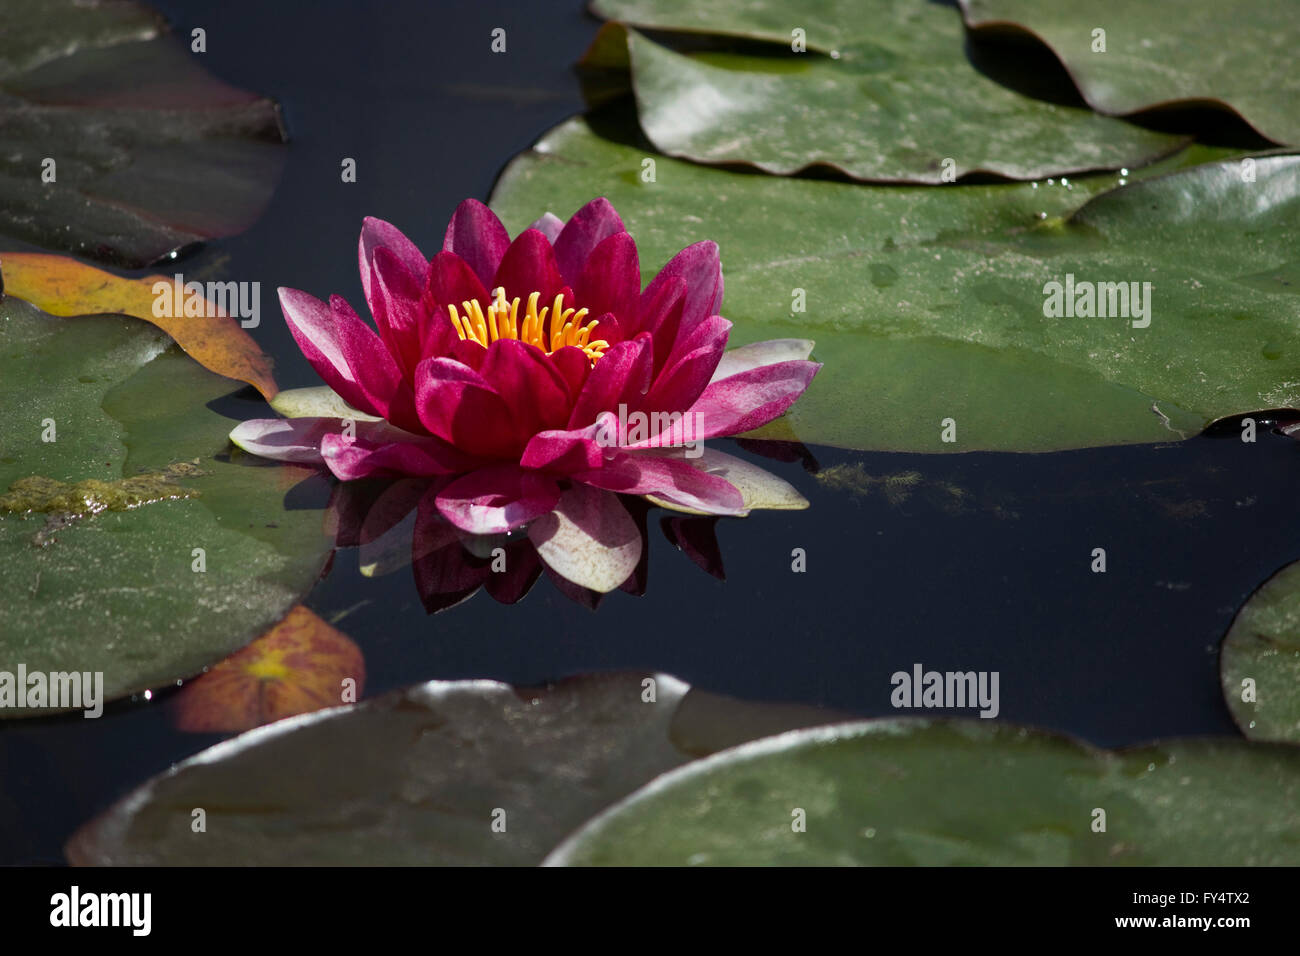 Close-up of a sacred violet color water lily (waterlily cultivar) hydrophilic herb blossom surrounded by floating lily pads. Stock Photo